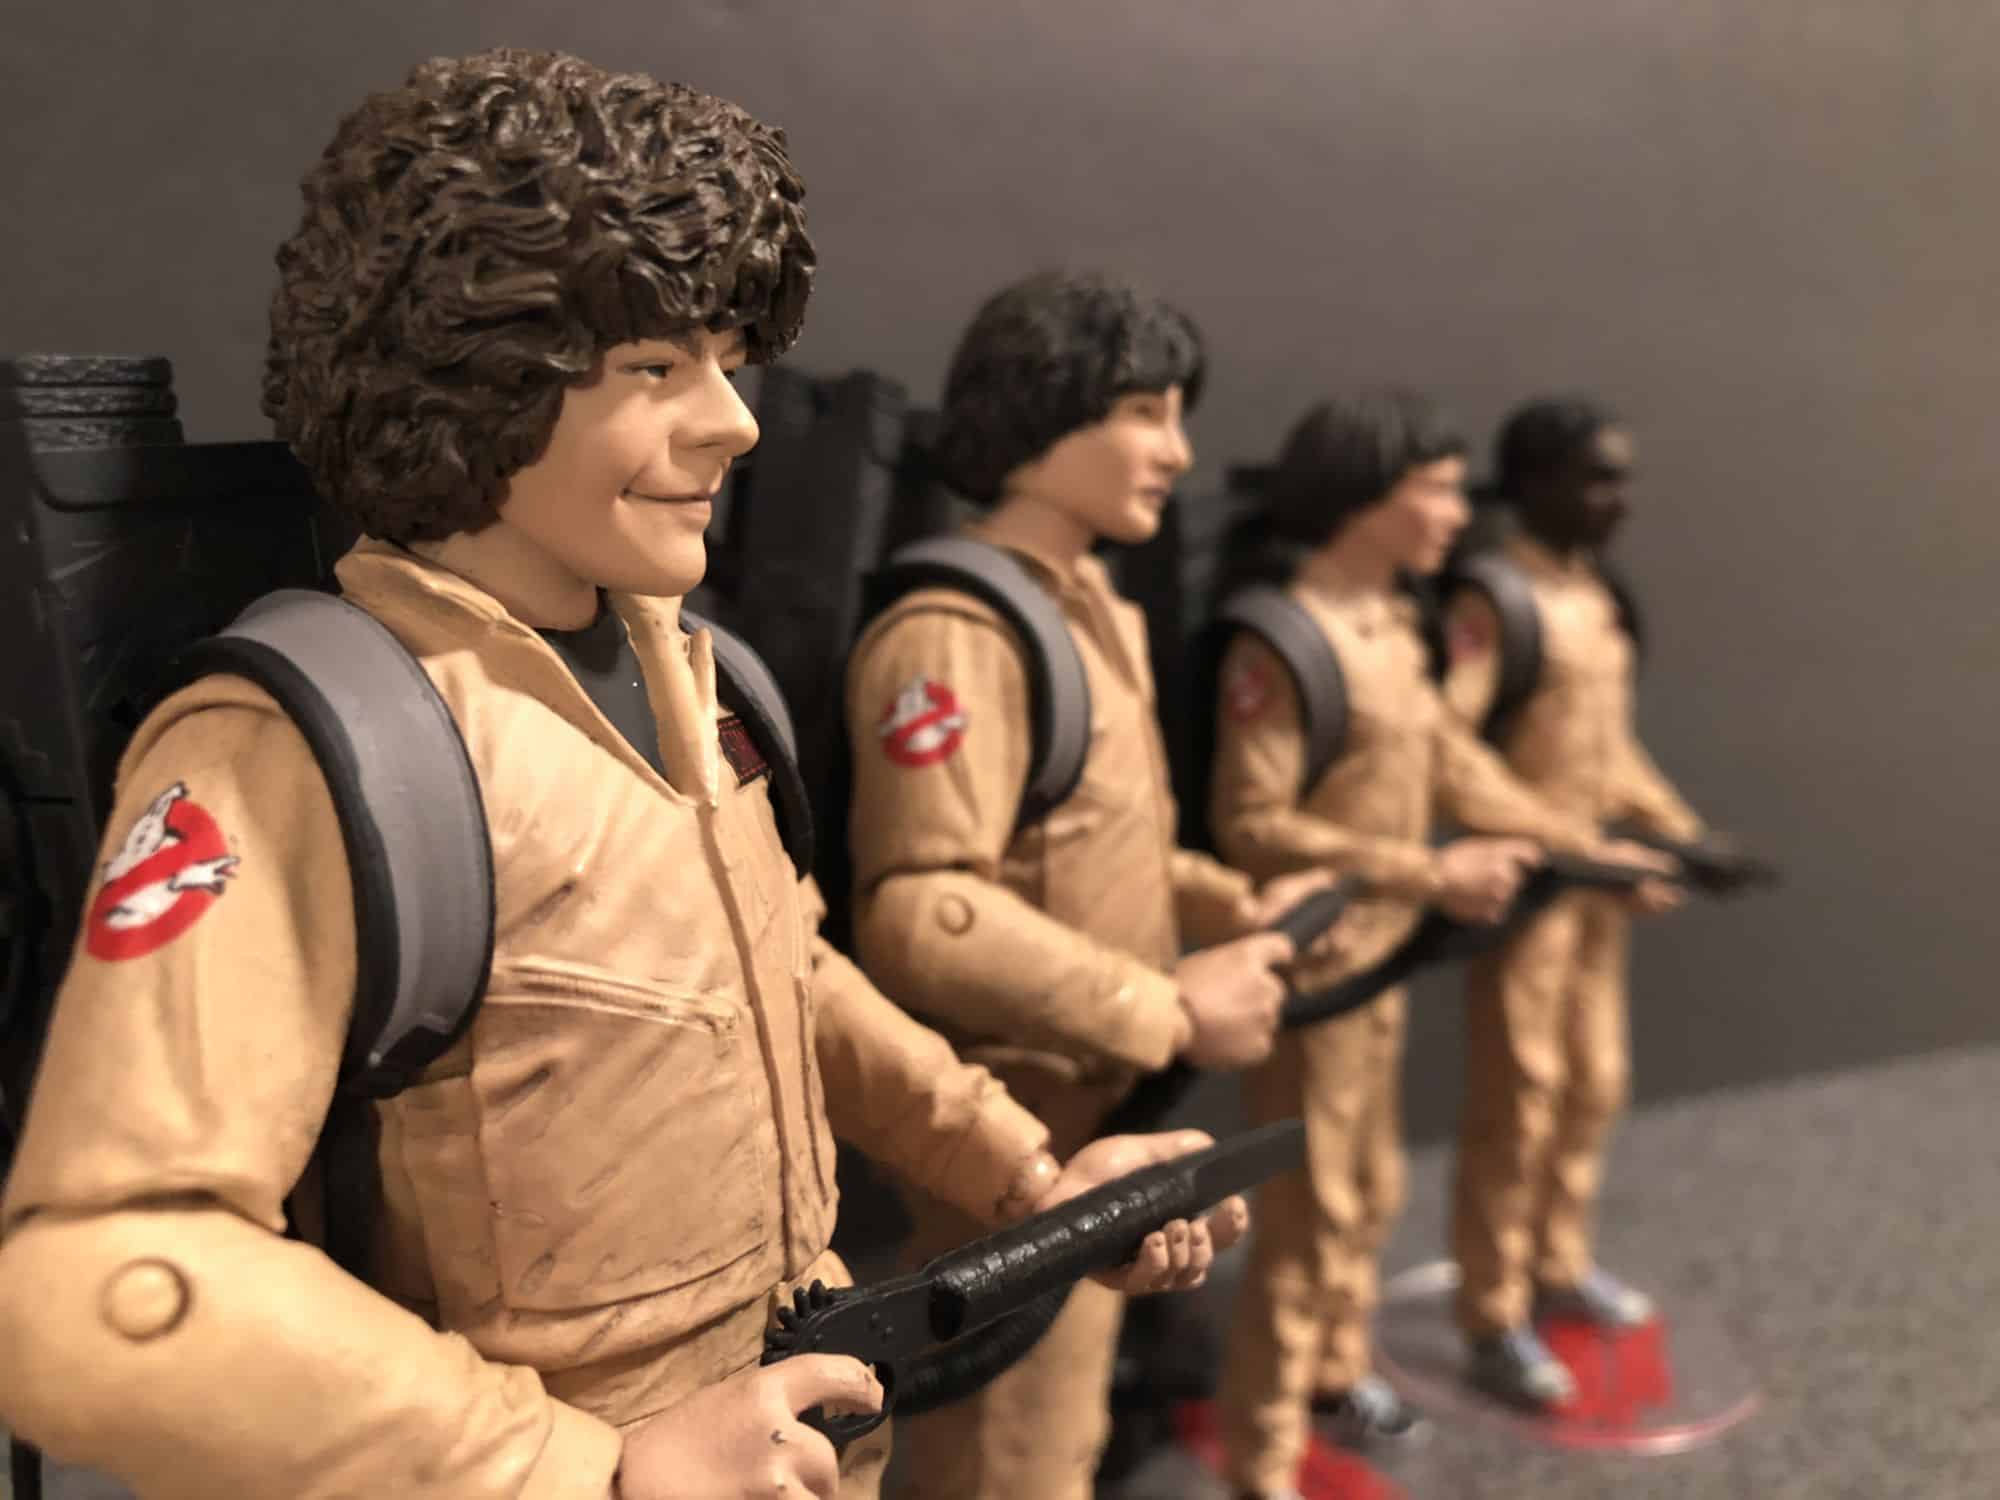 stranger things ghostbusters toys